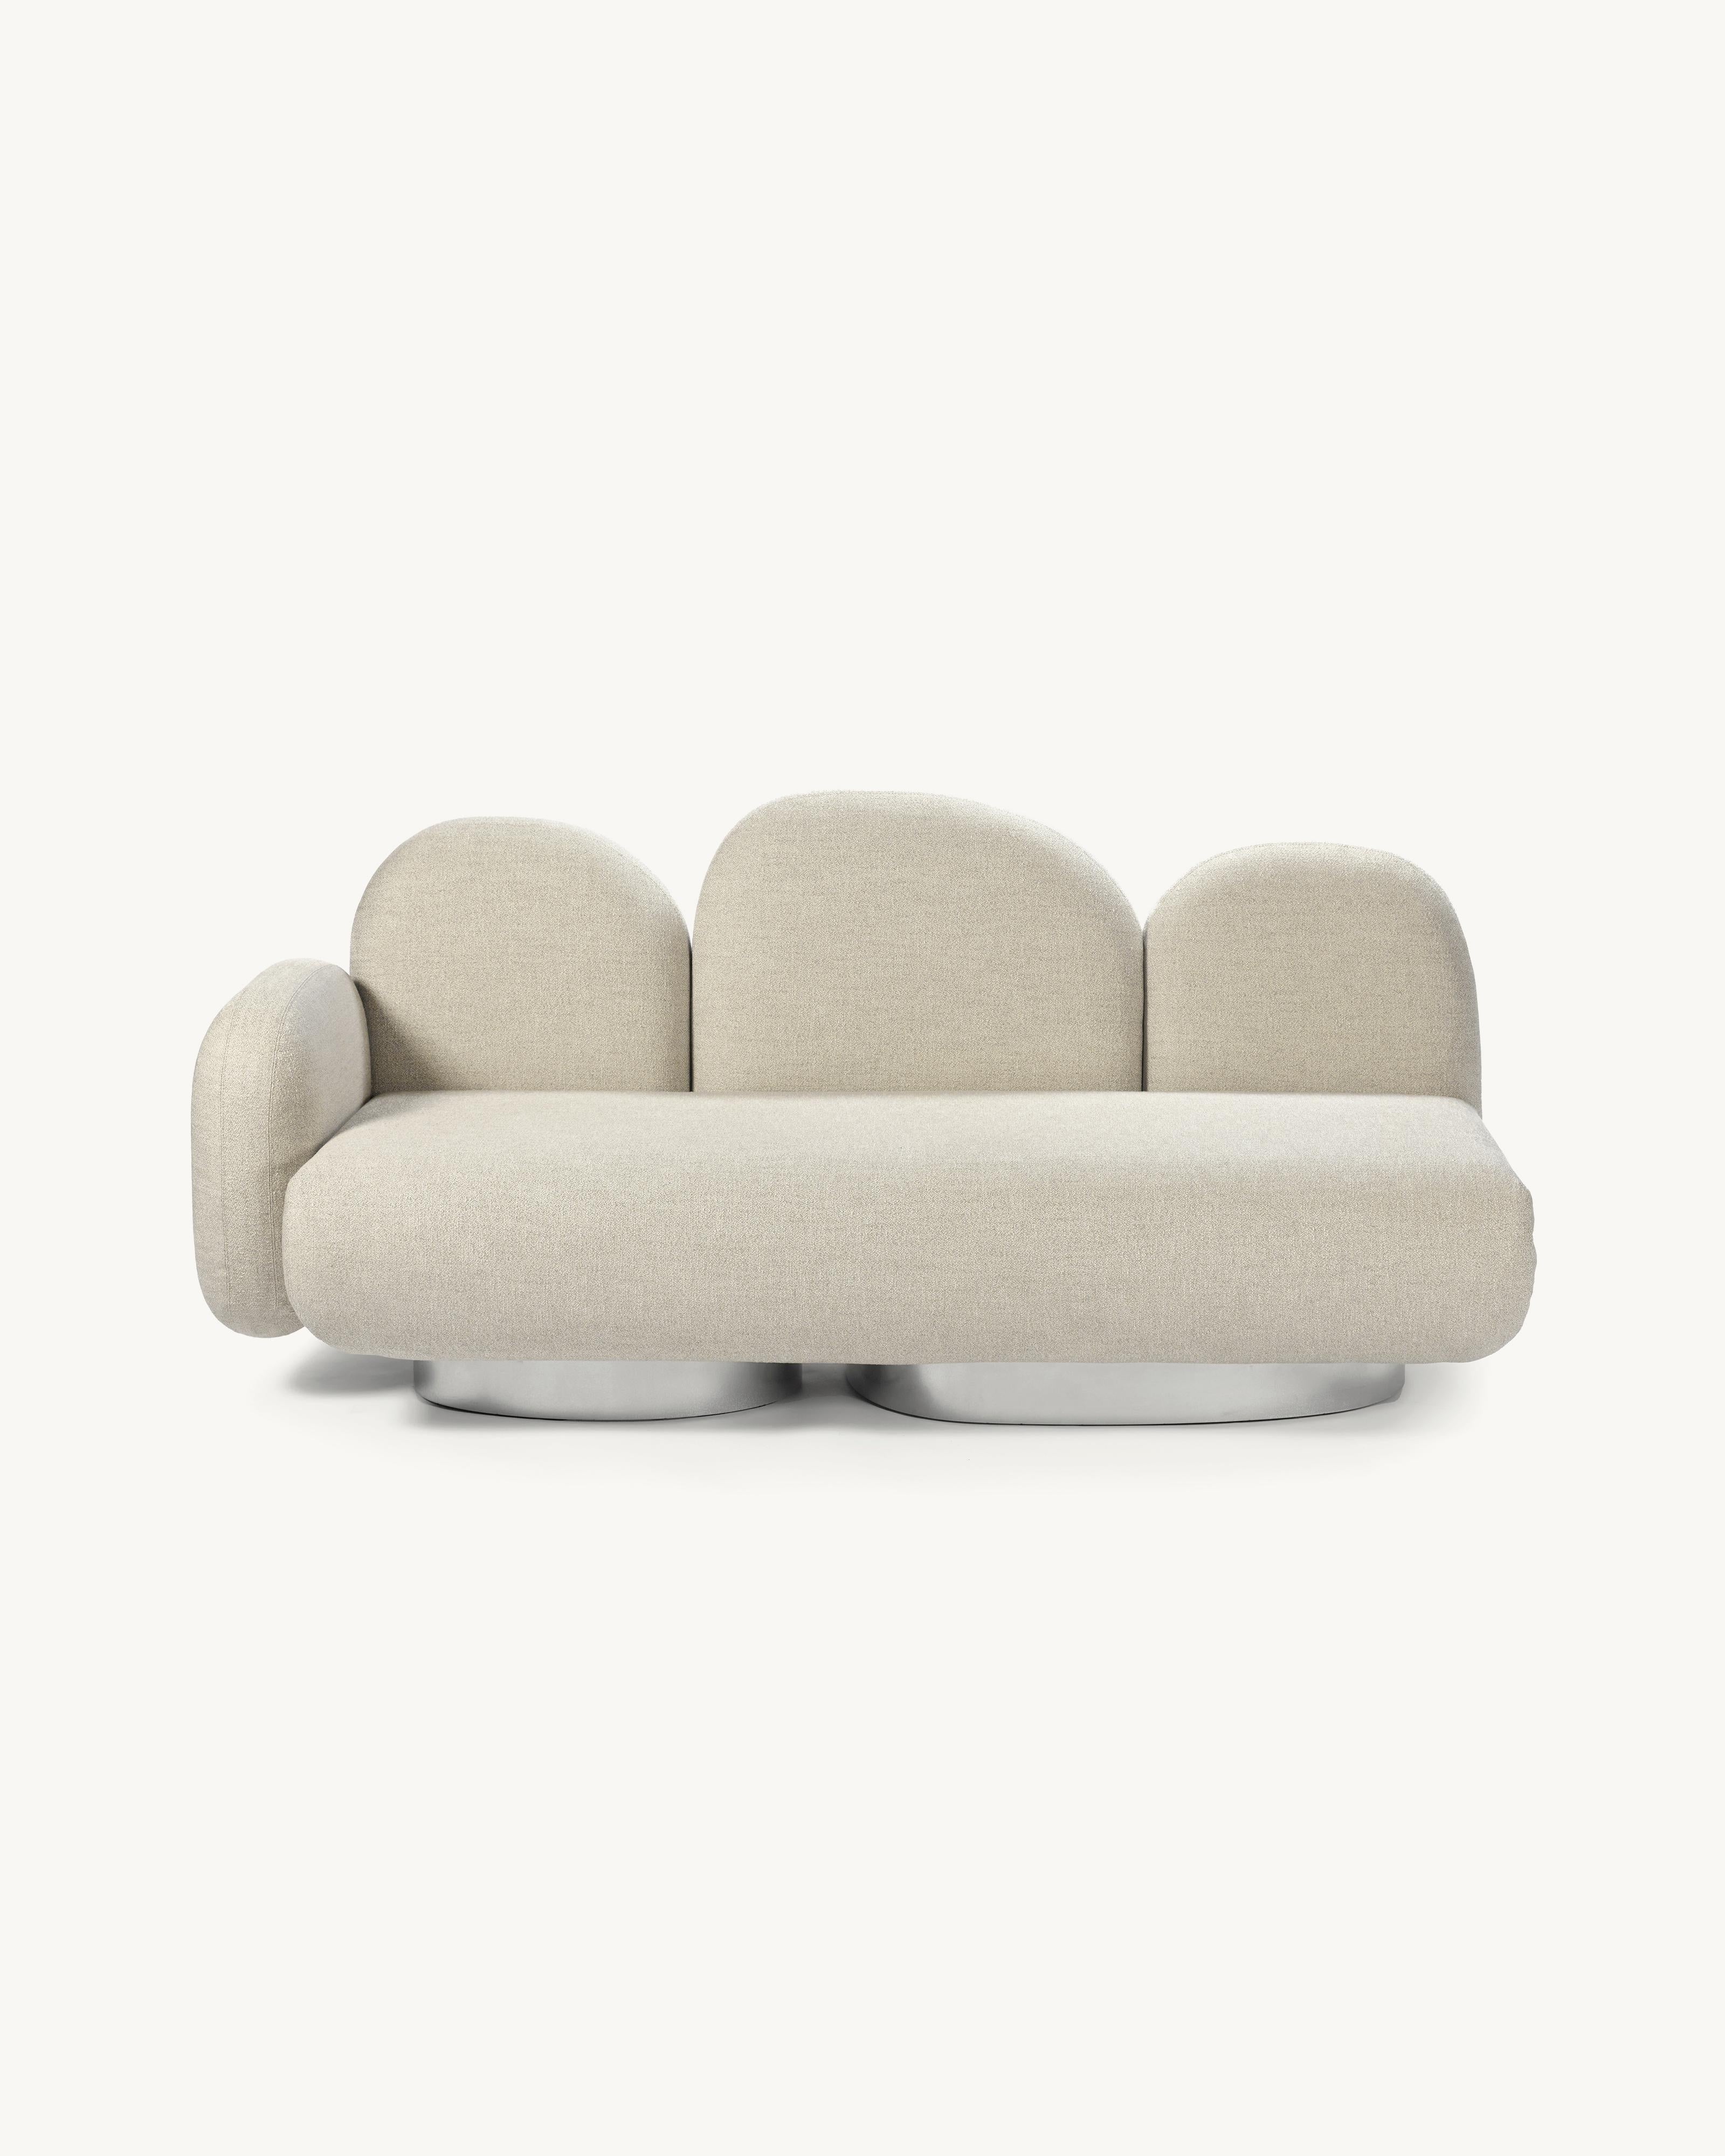 Contemporary Sofa 'Assemble' by Destroyers/Builders, 2 seaters + 1 armrest In New Condition For Sale In Paris, FR